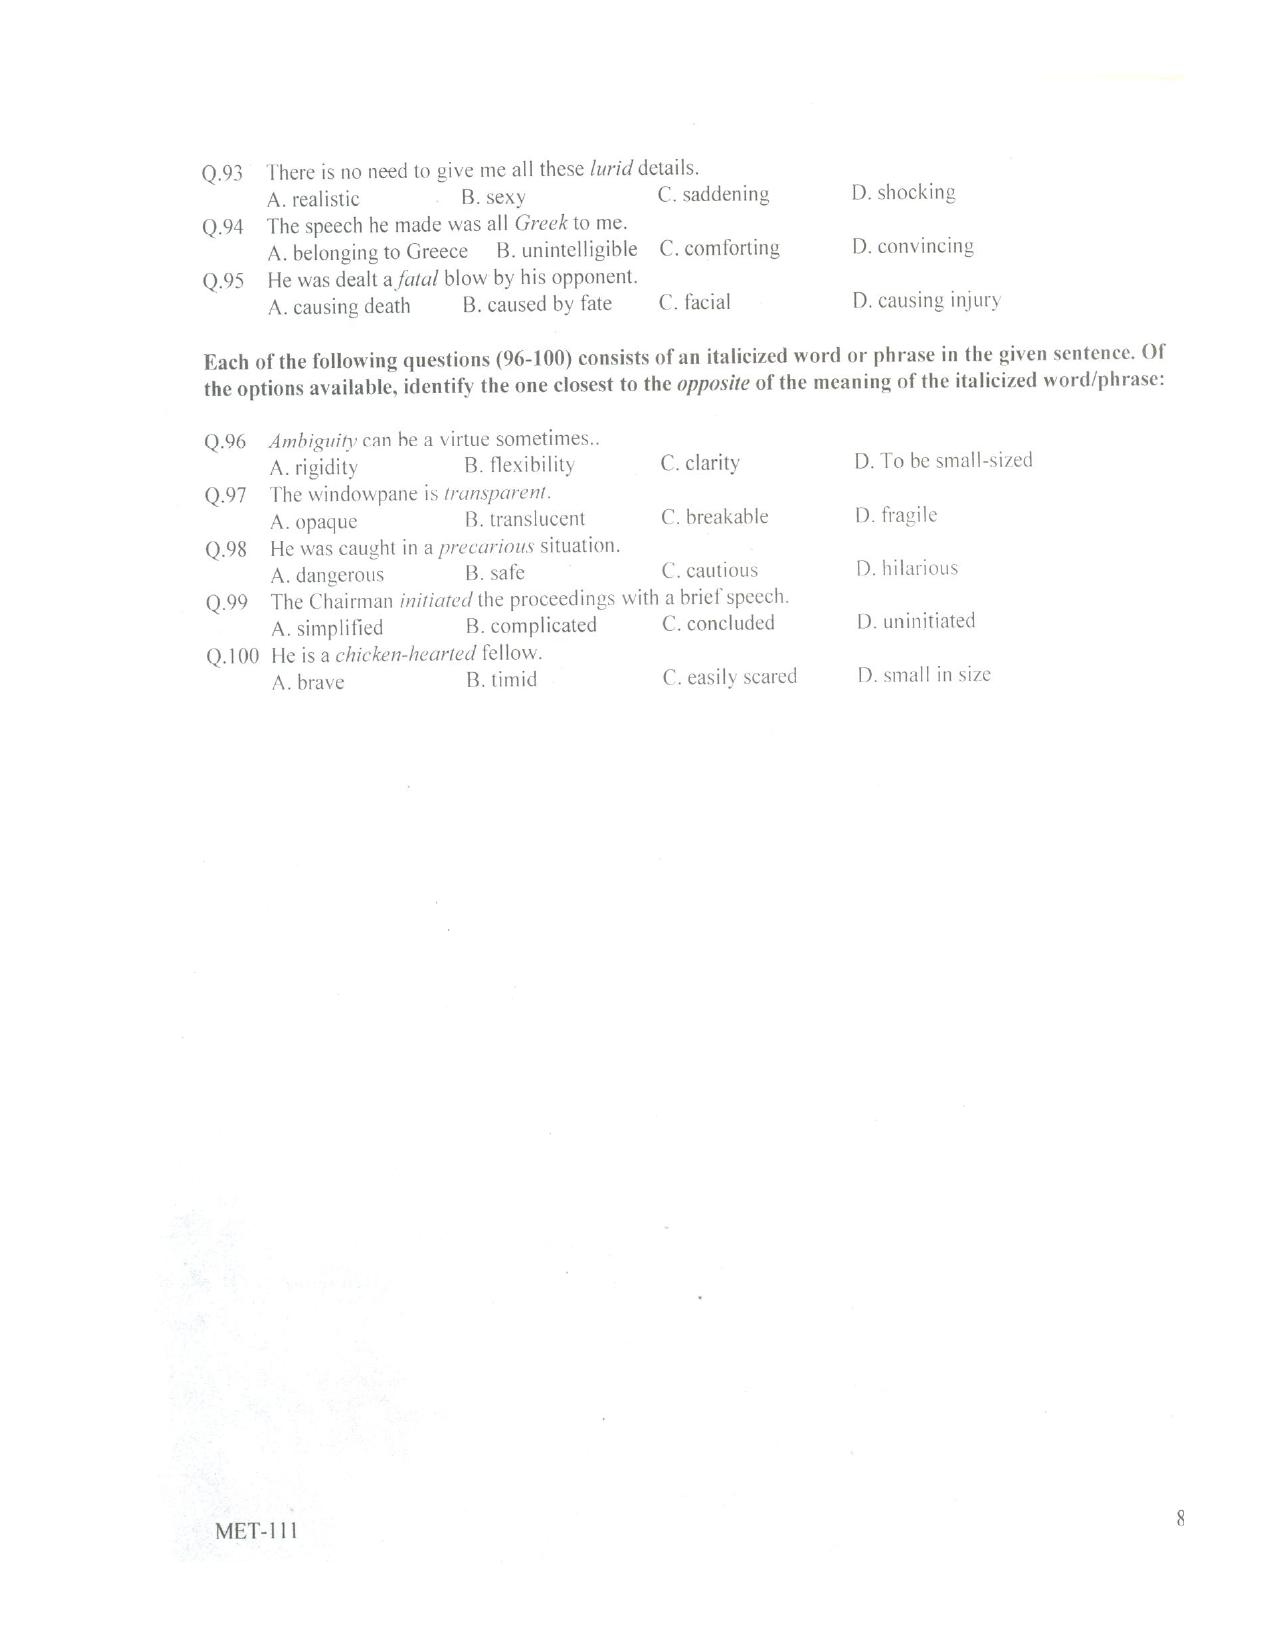 PU MET 2010 Question Booklet with Key - Page 8